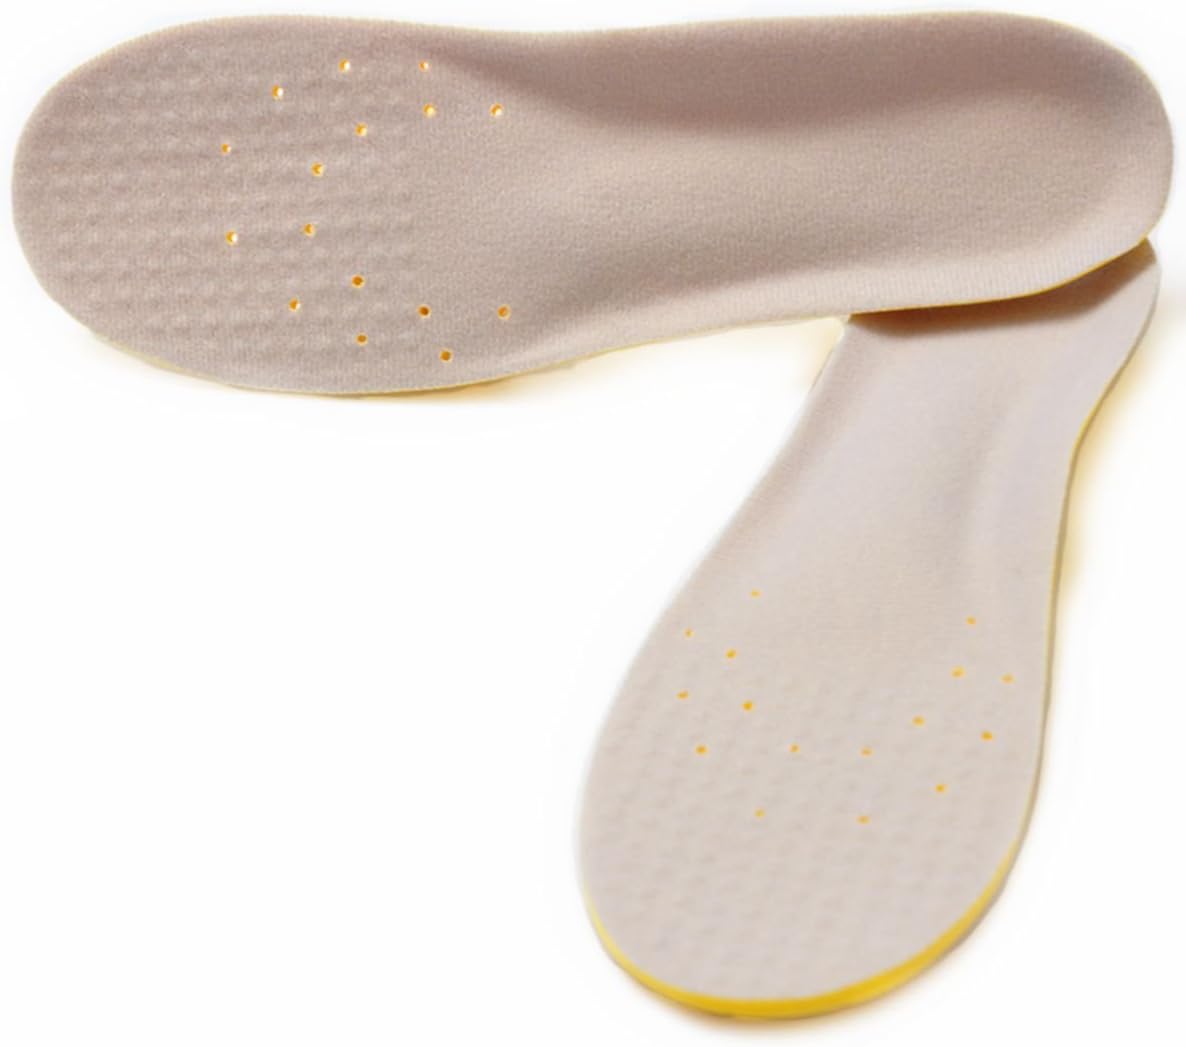 Shoe Insoles, Memory Foam Insoles, Providing Excellent Shock Absorption and Cushioning for Feet Relief, Comfortable Insoles for Men and Women for Everyday Use, M [US M: 6-9/W: 7-11]